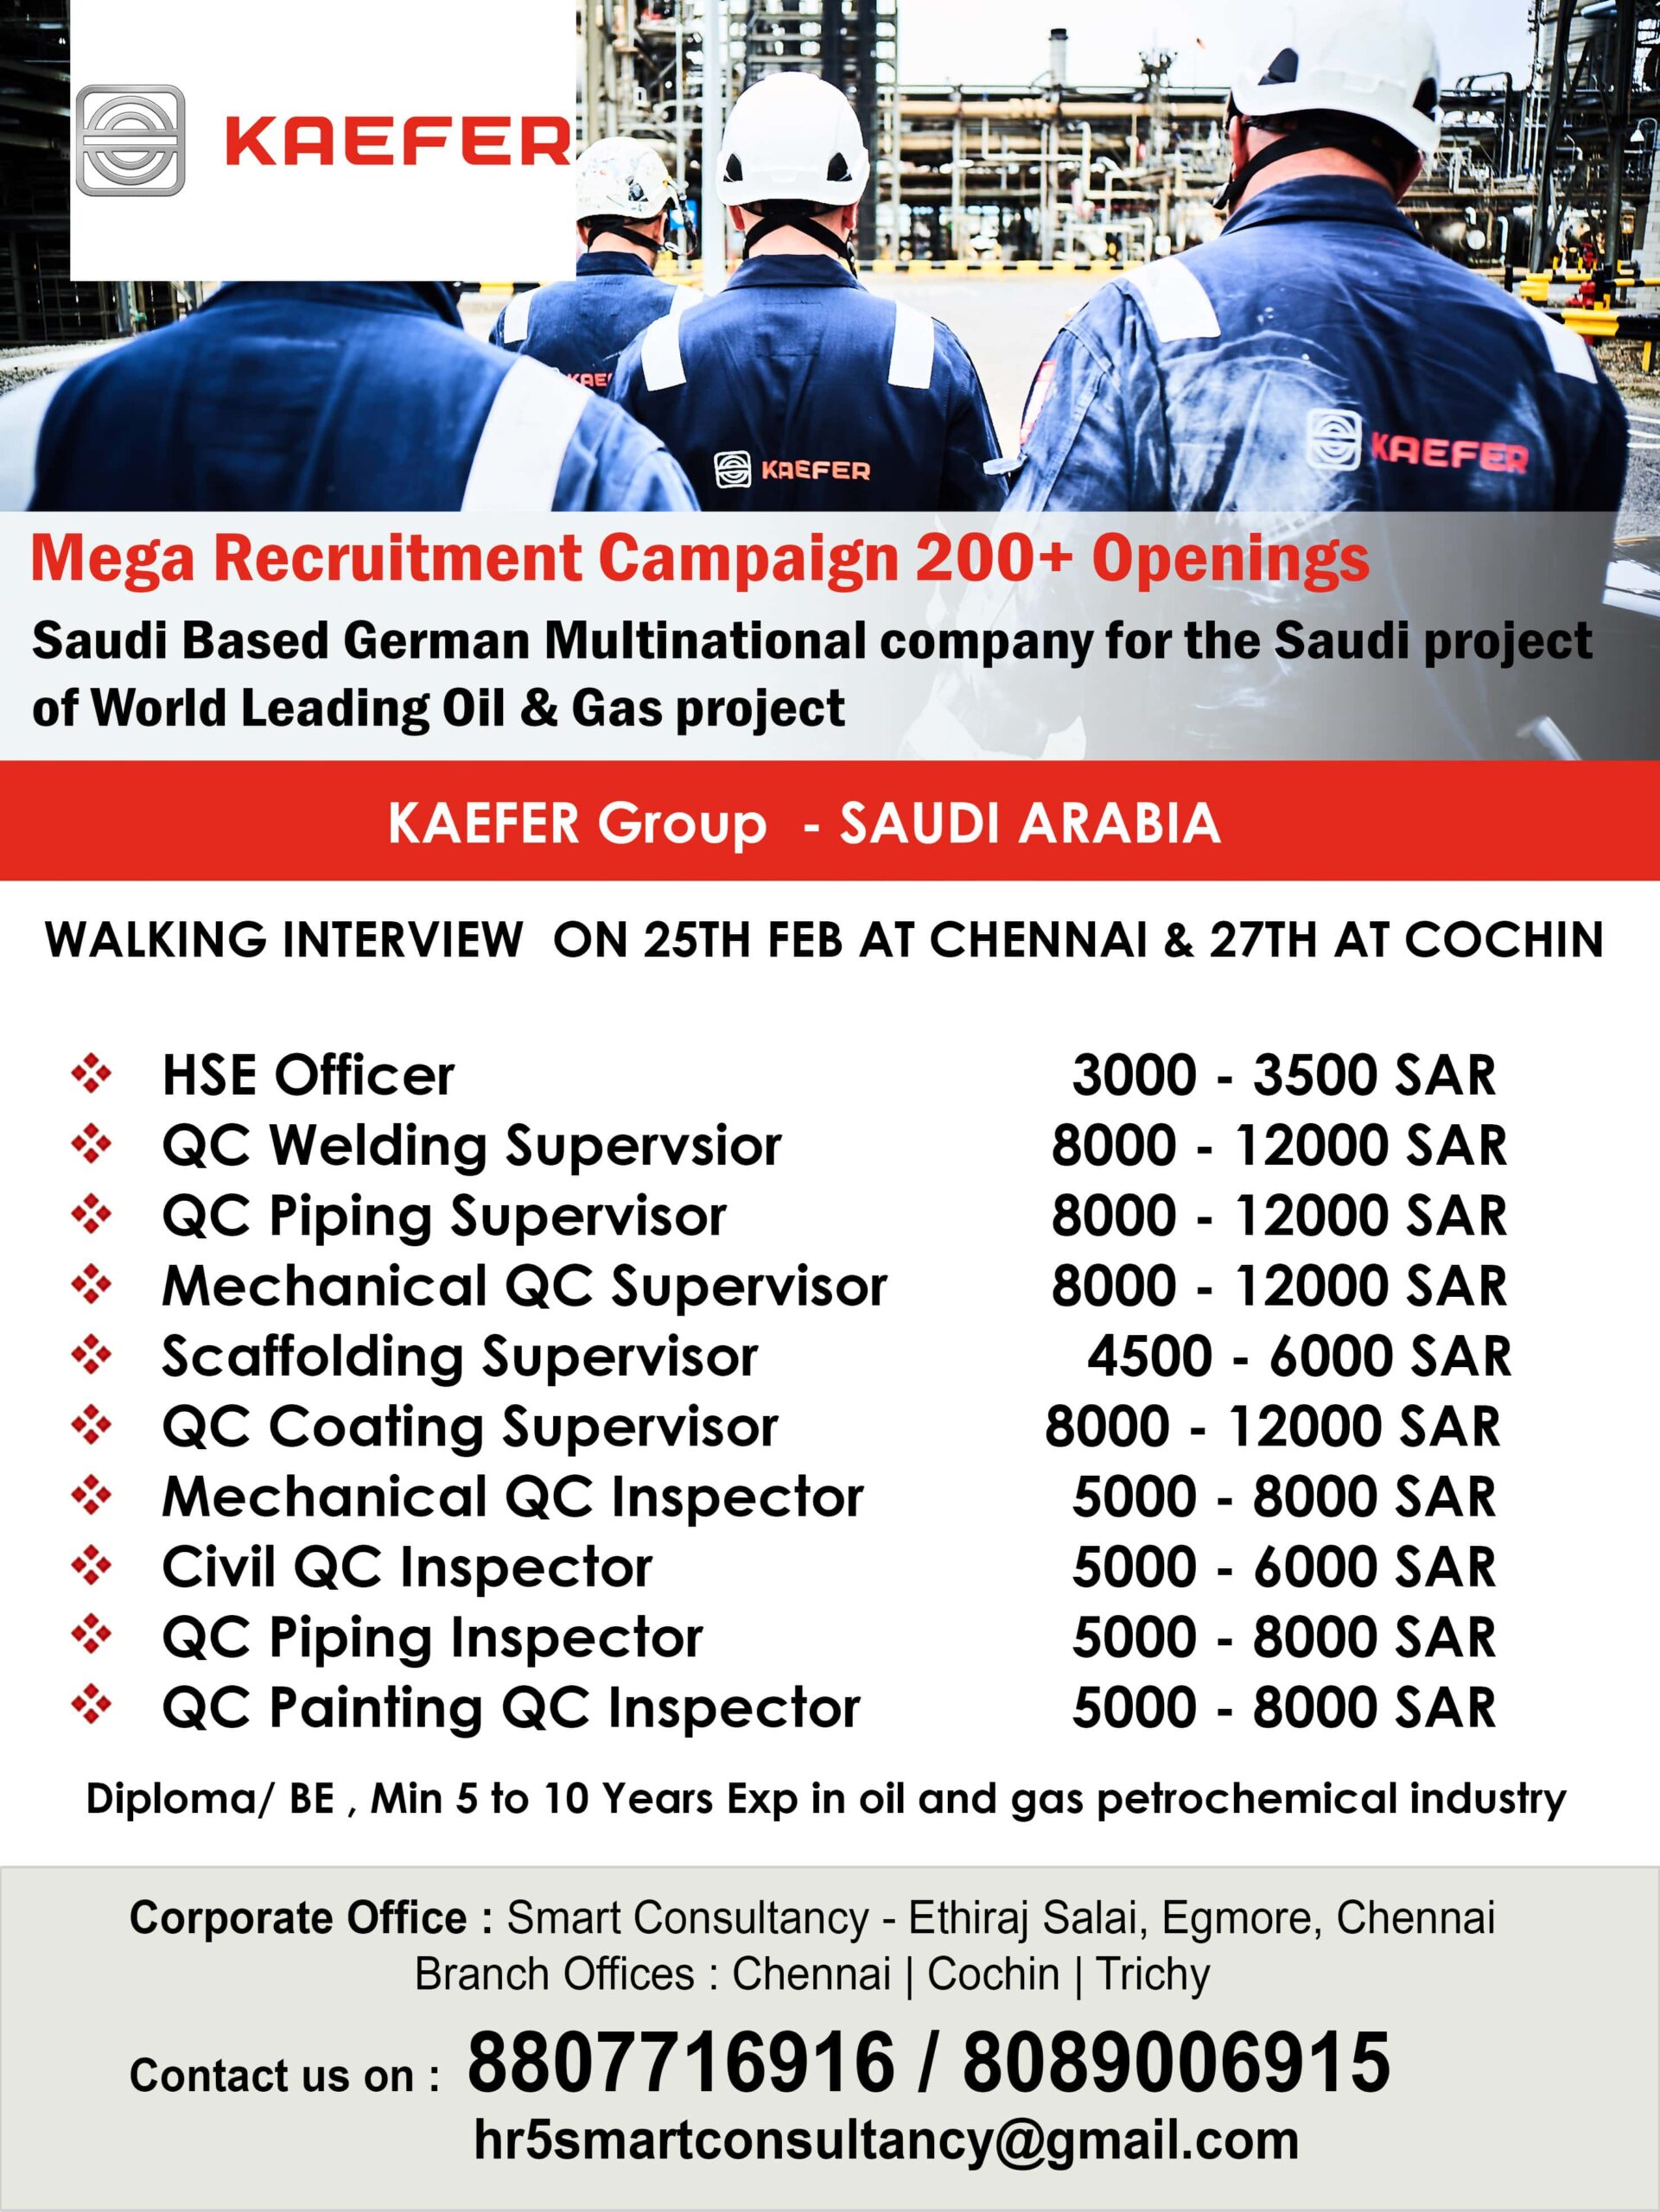 Saudi Based German Multinational company for the Saudi project of World Leading Oil & Gas project